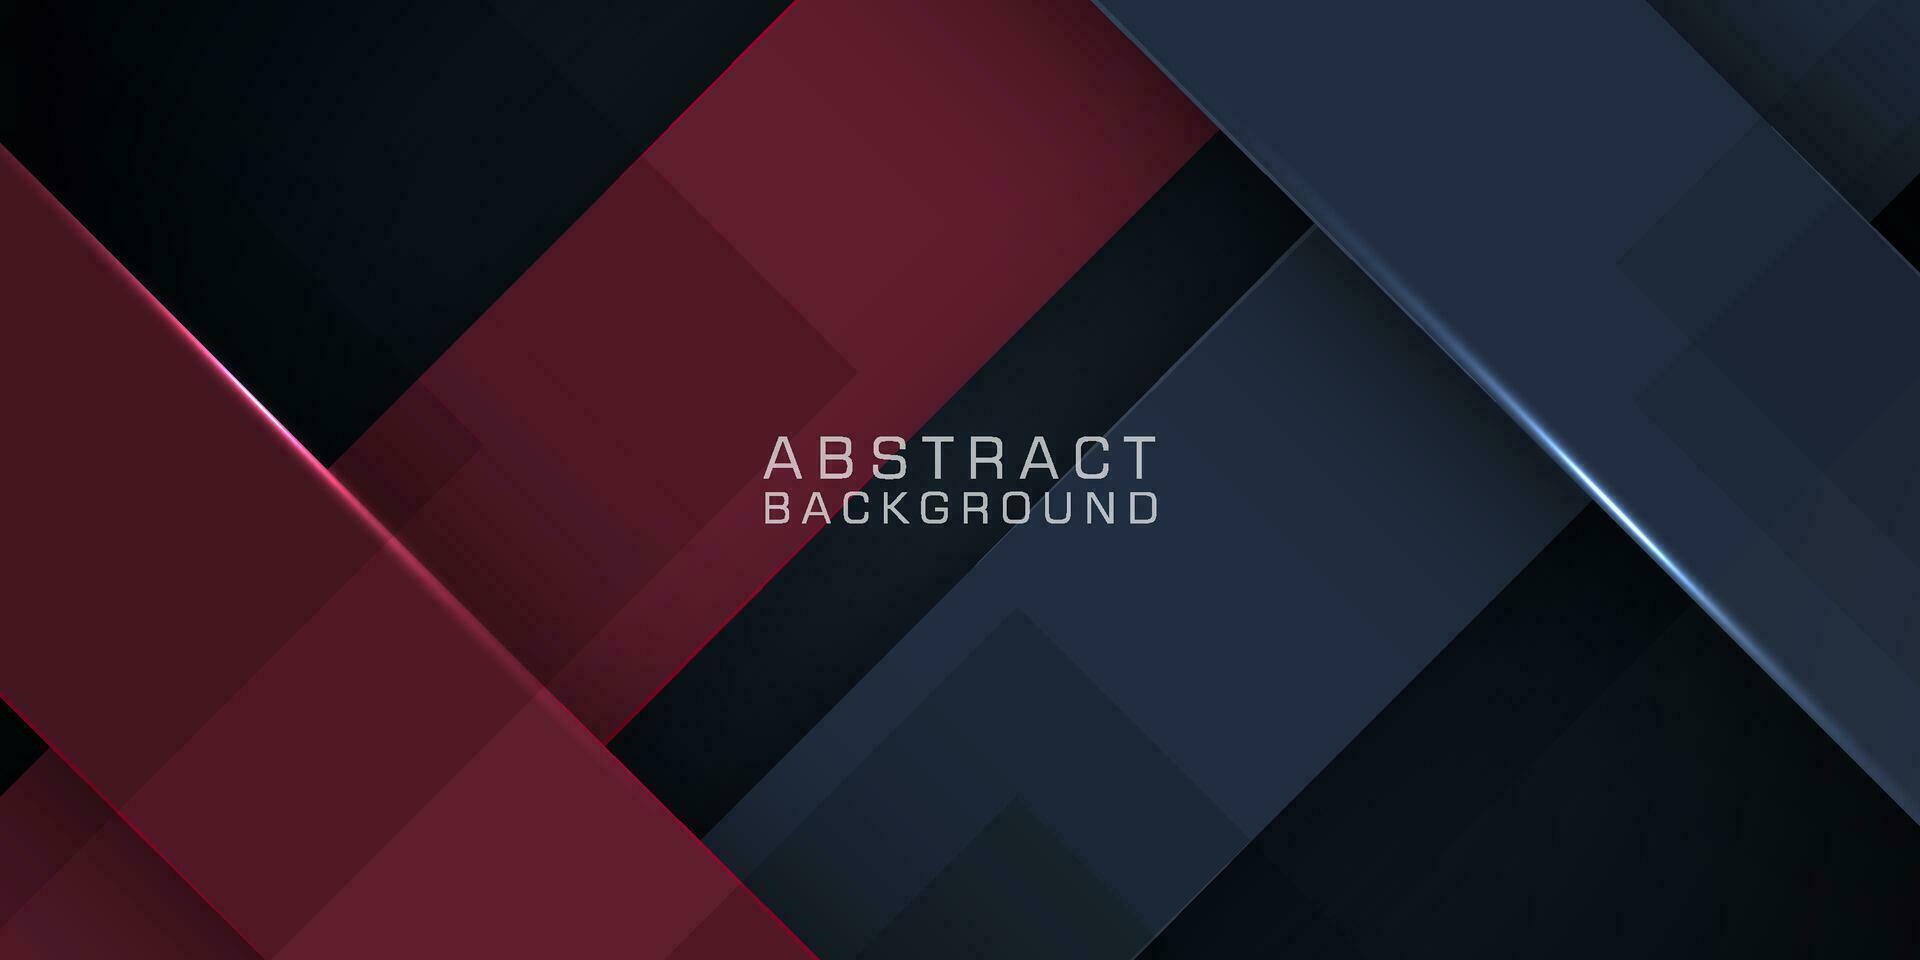 Abstract dark gray and red papercut on geometric background design. Modern overlap futuristic background vector illustration with shadow. Eps10 vector